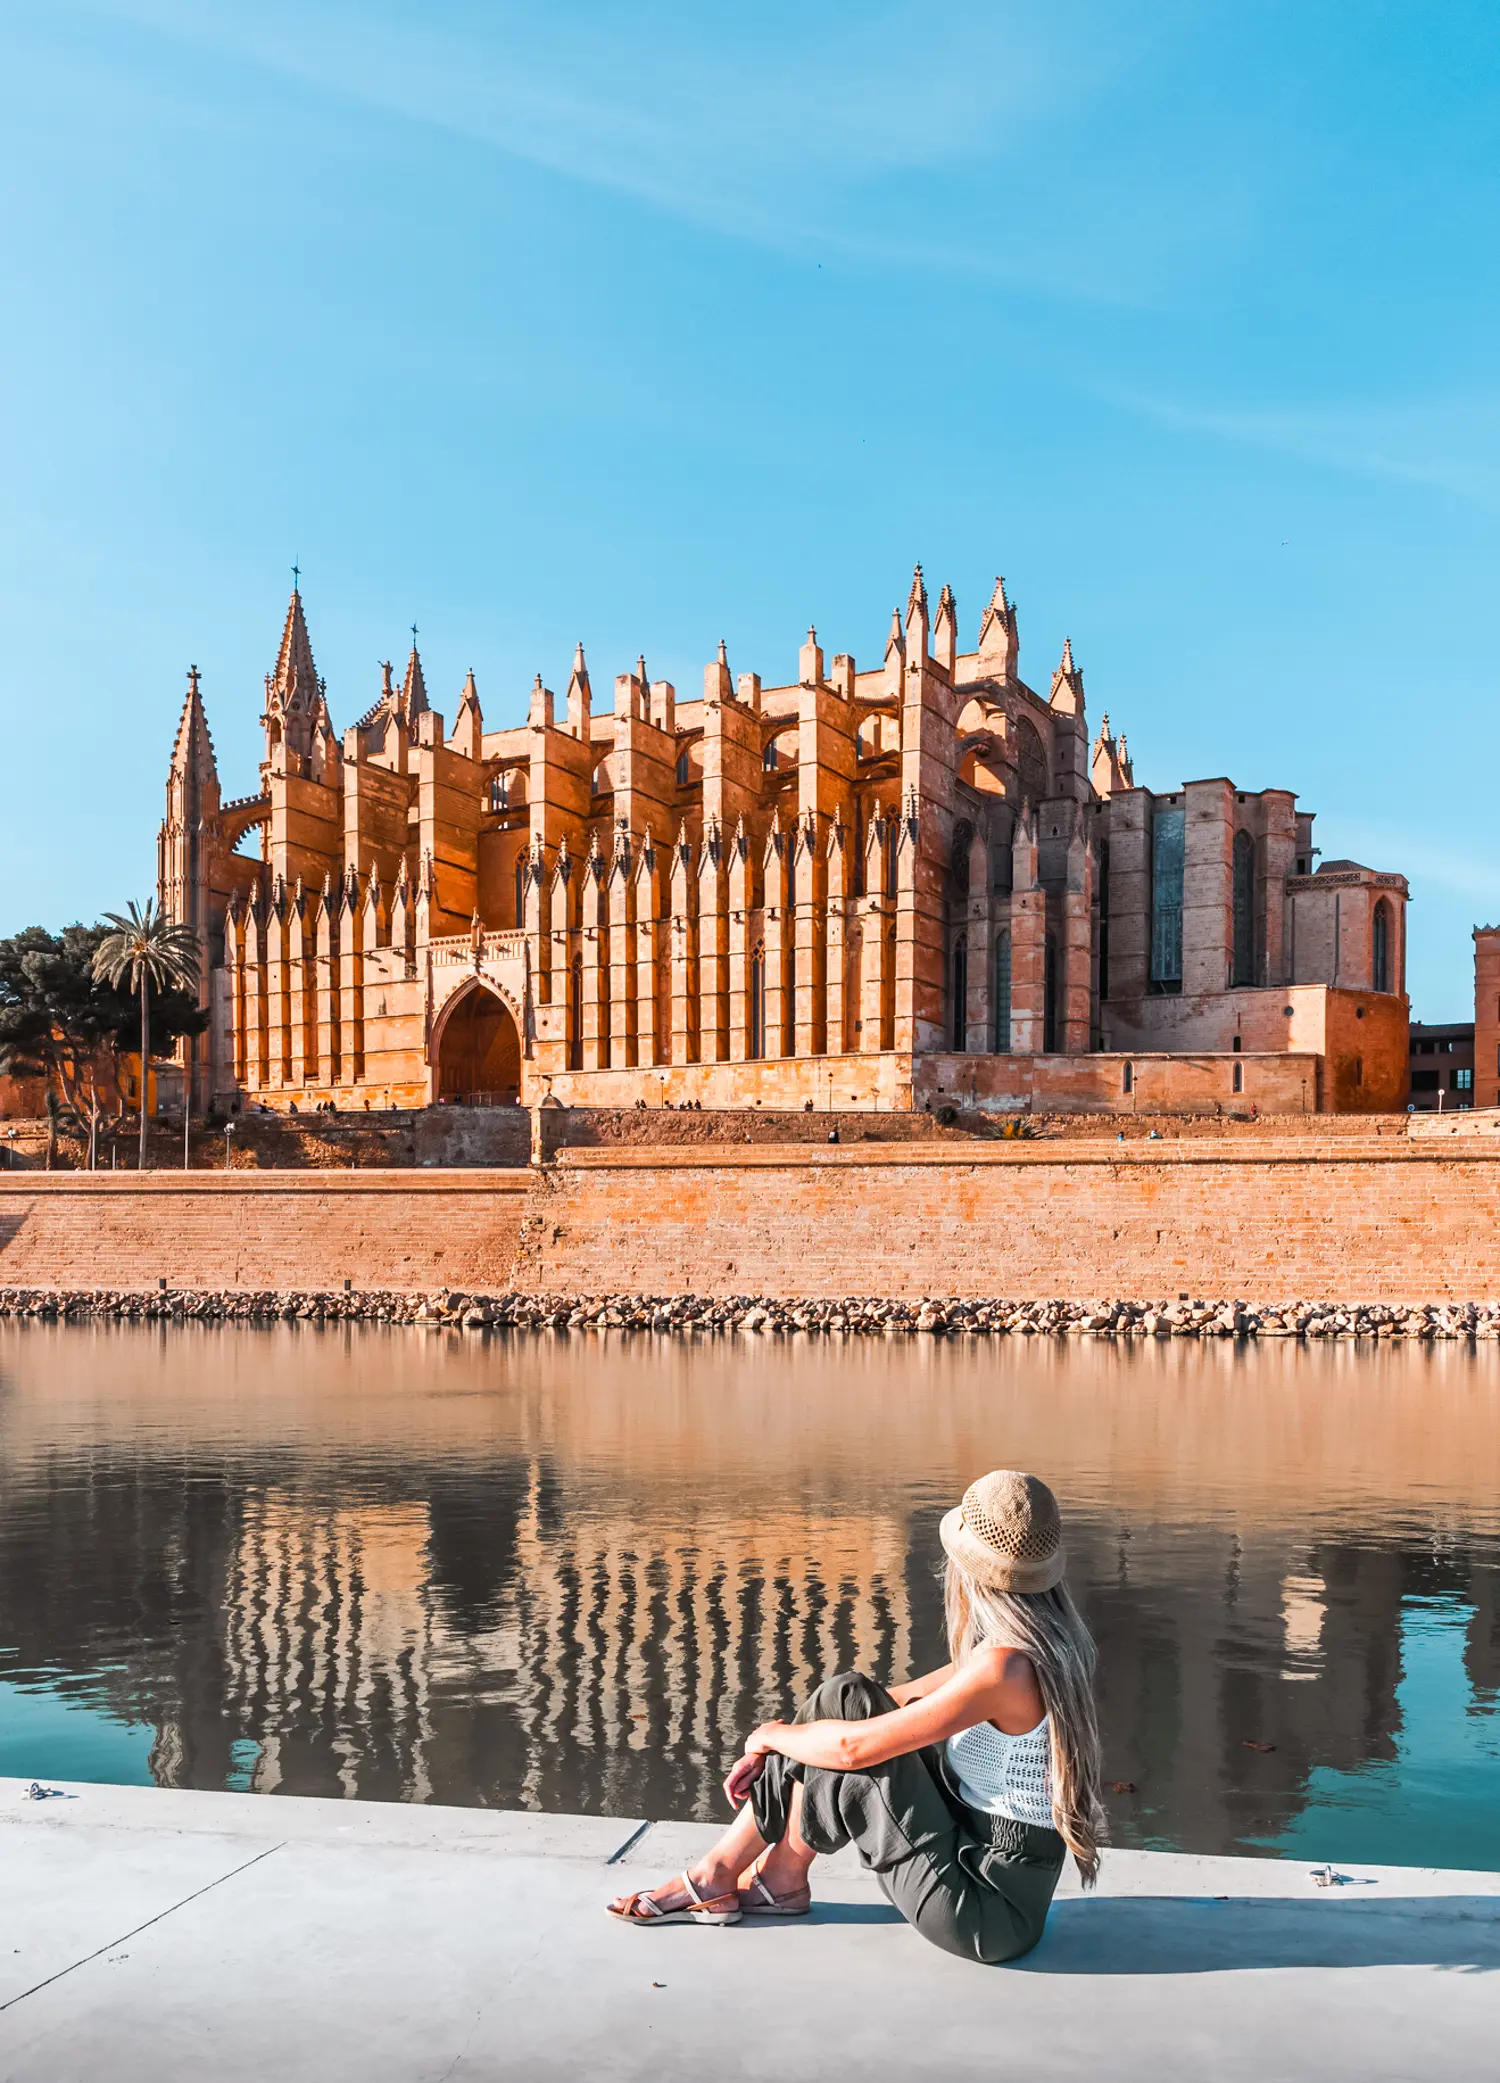 Girl with long hair, wearing green pants and a white top, sitting along the river in Palma de Mallorca looking over at the beige Palma Cathedral on the other side.